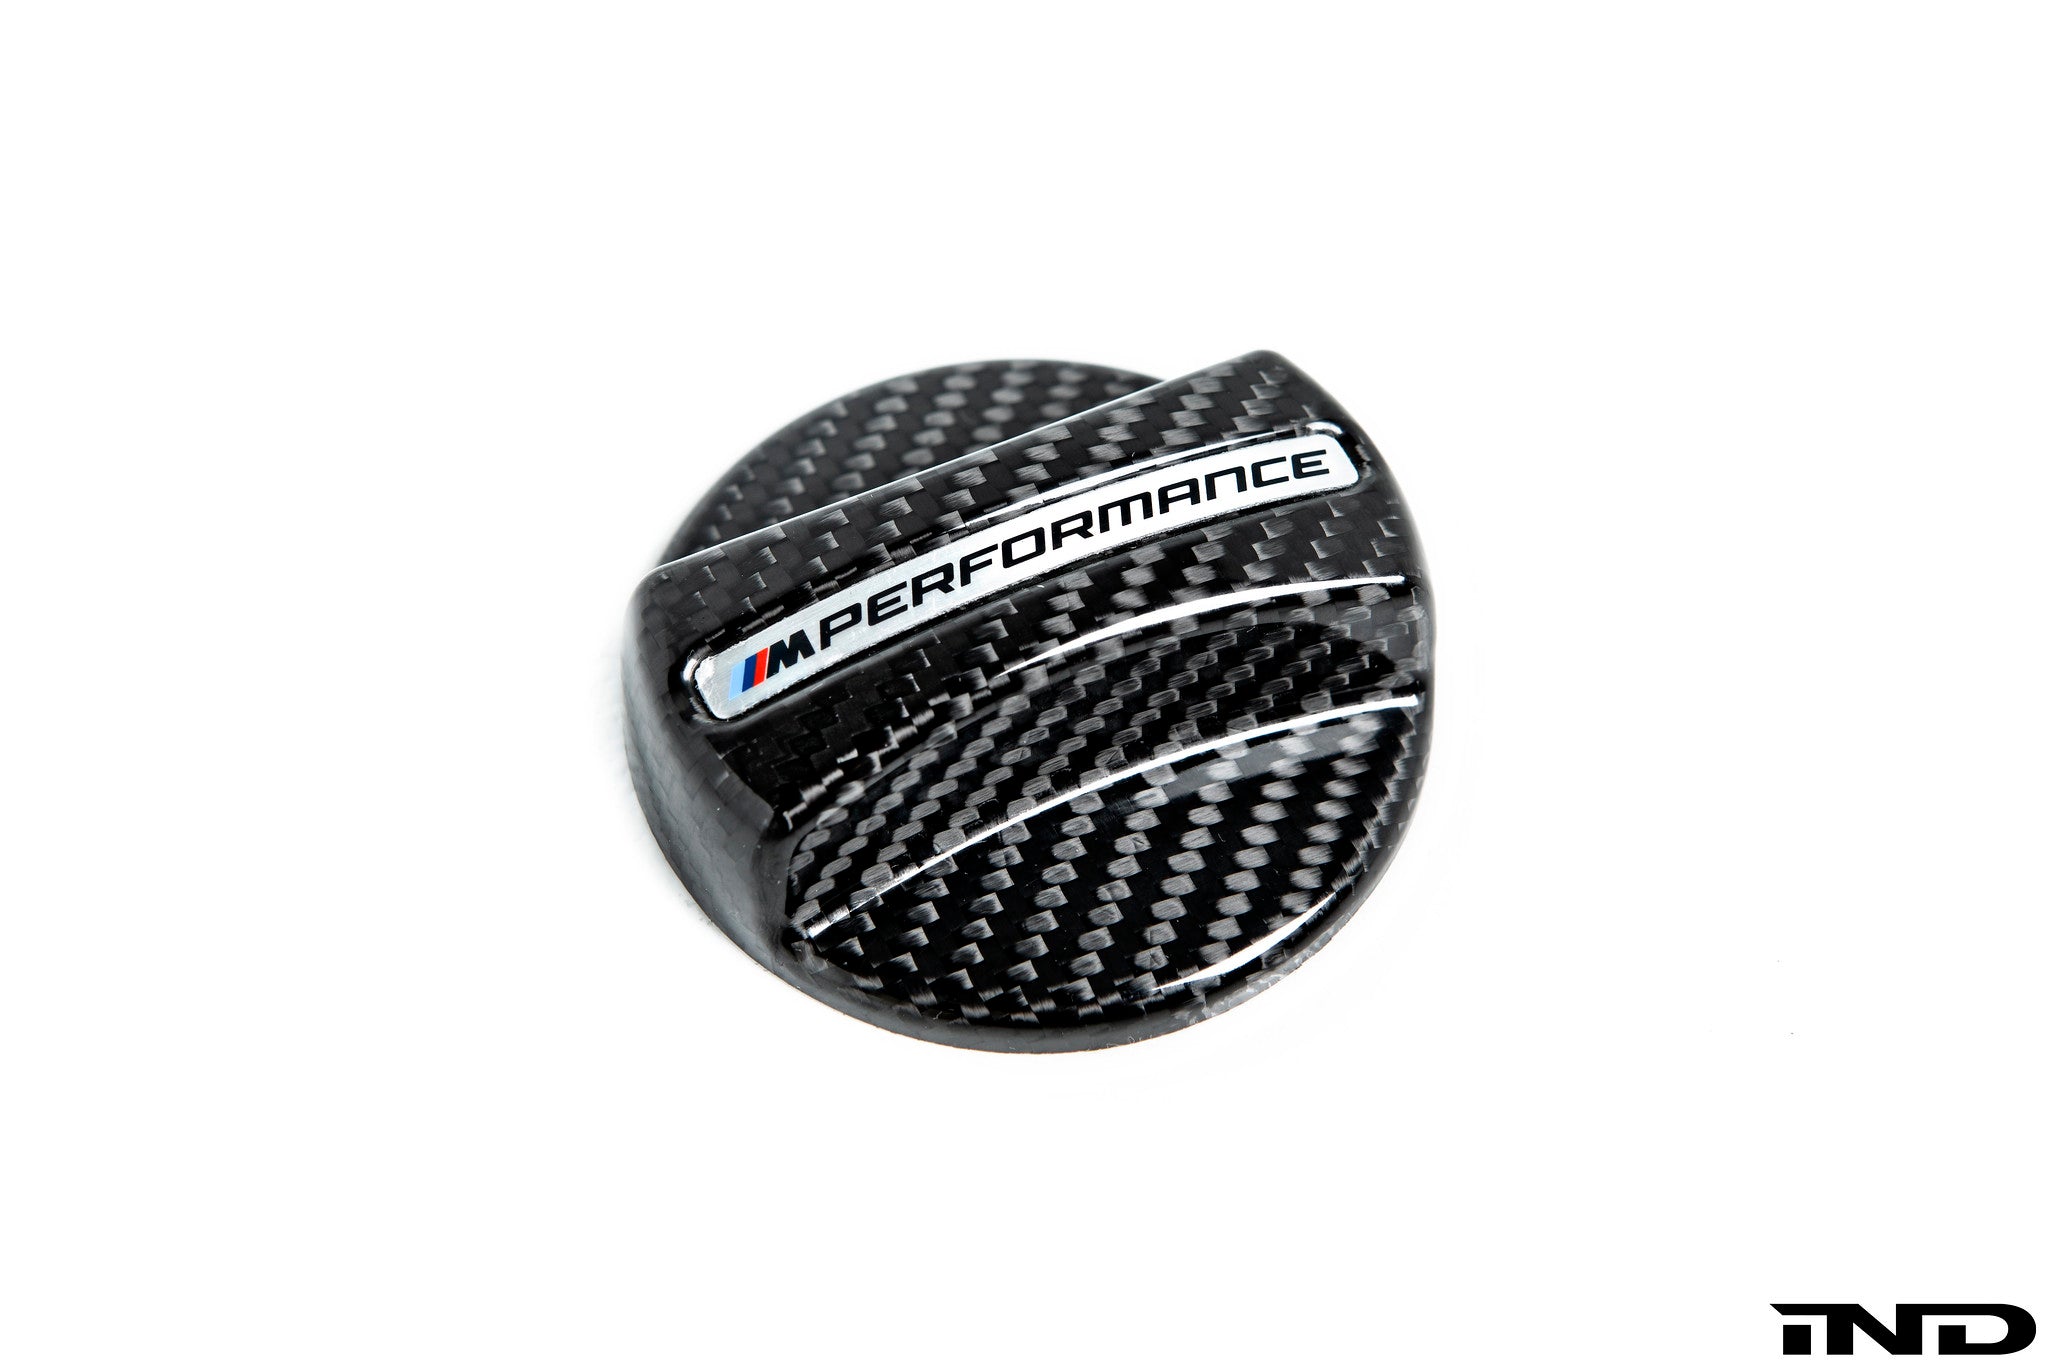 BMW Limited Edition Cap ///M Performance